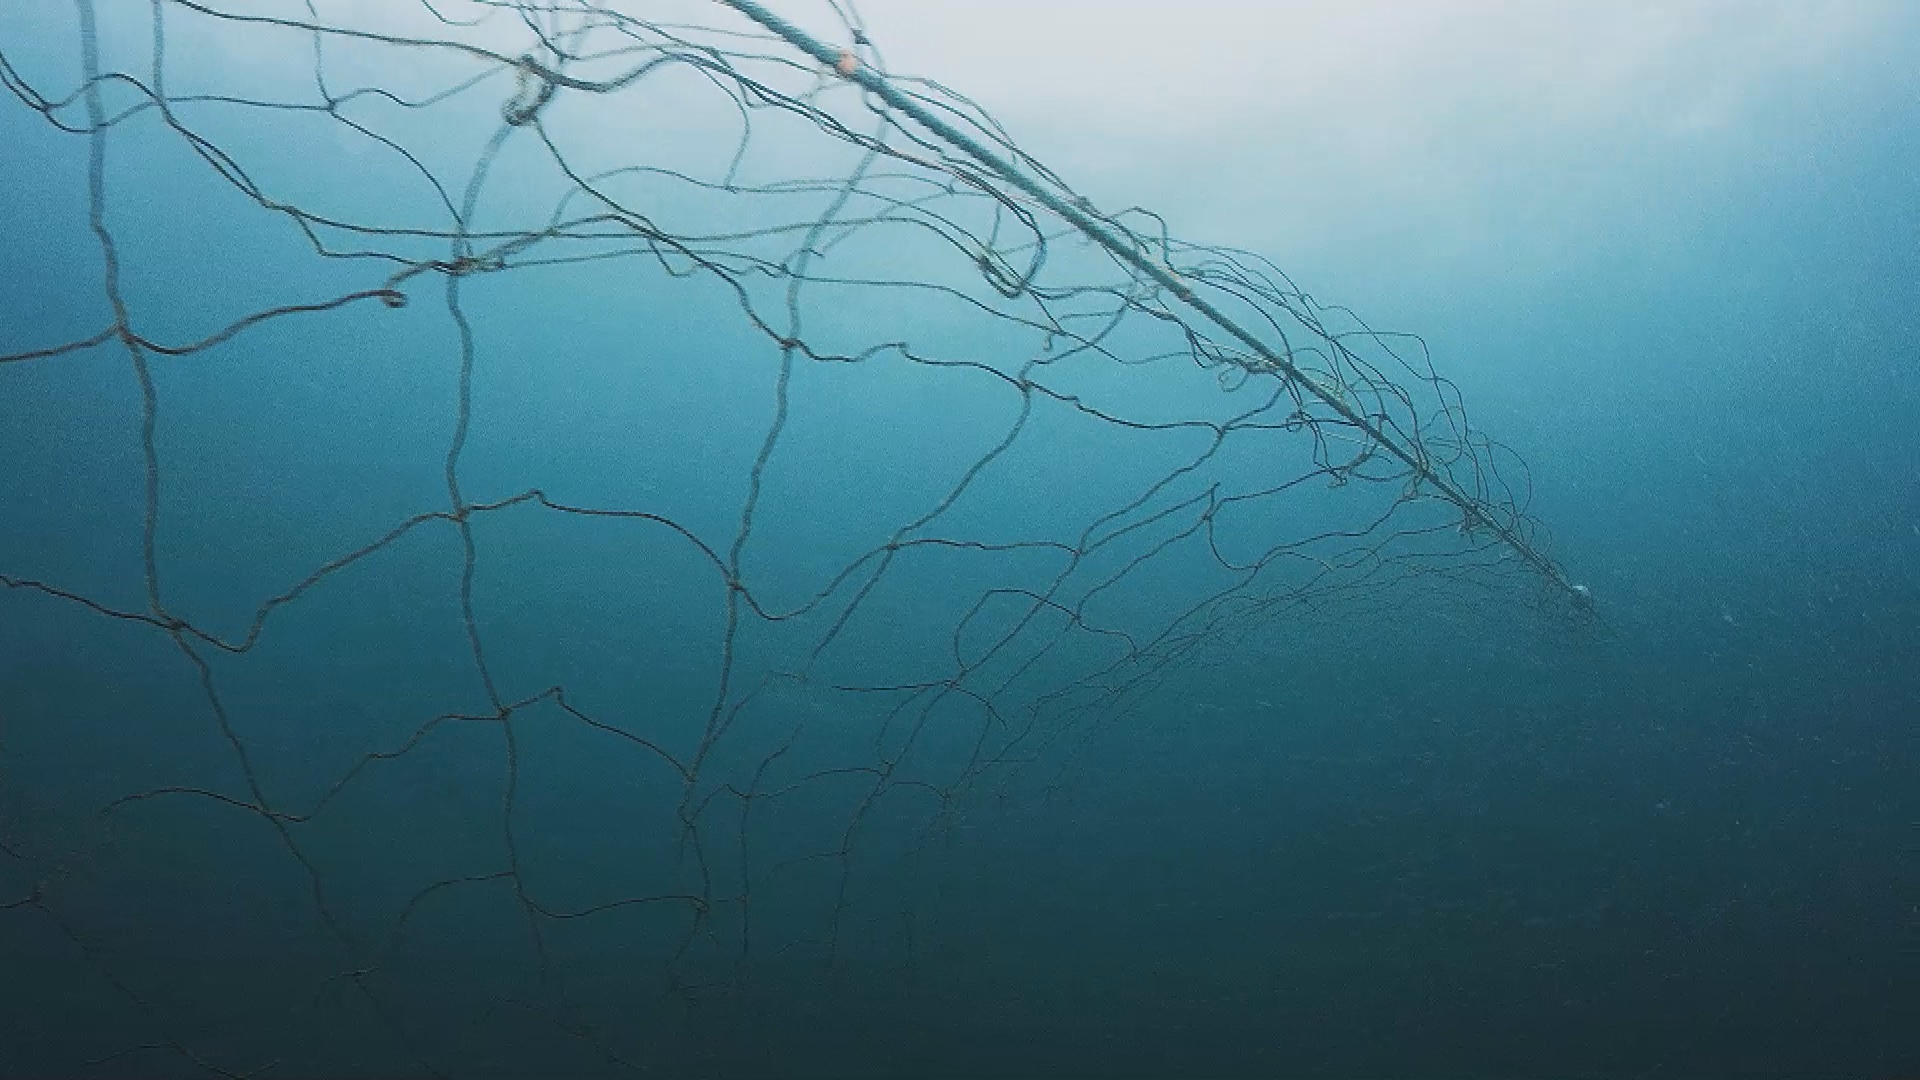 Effectiveness of shark nets questioned after fatal Sydney attack.